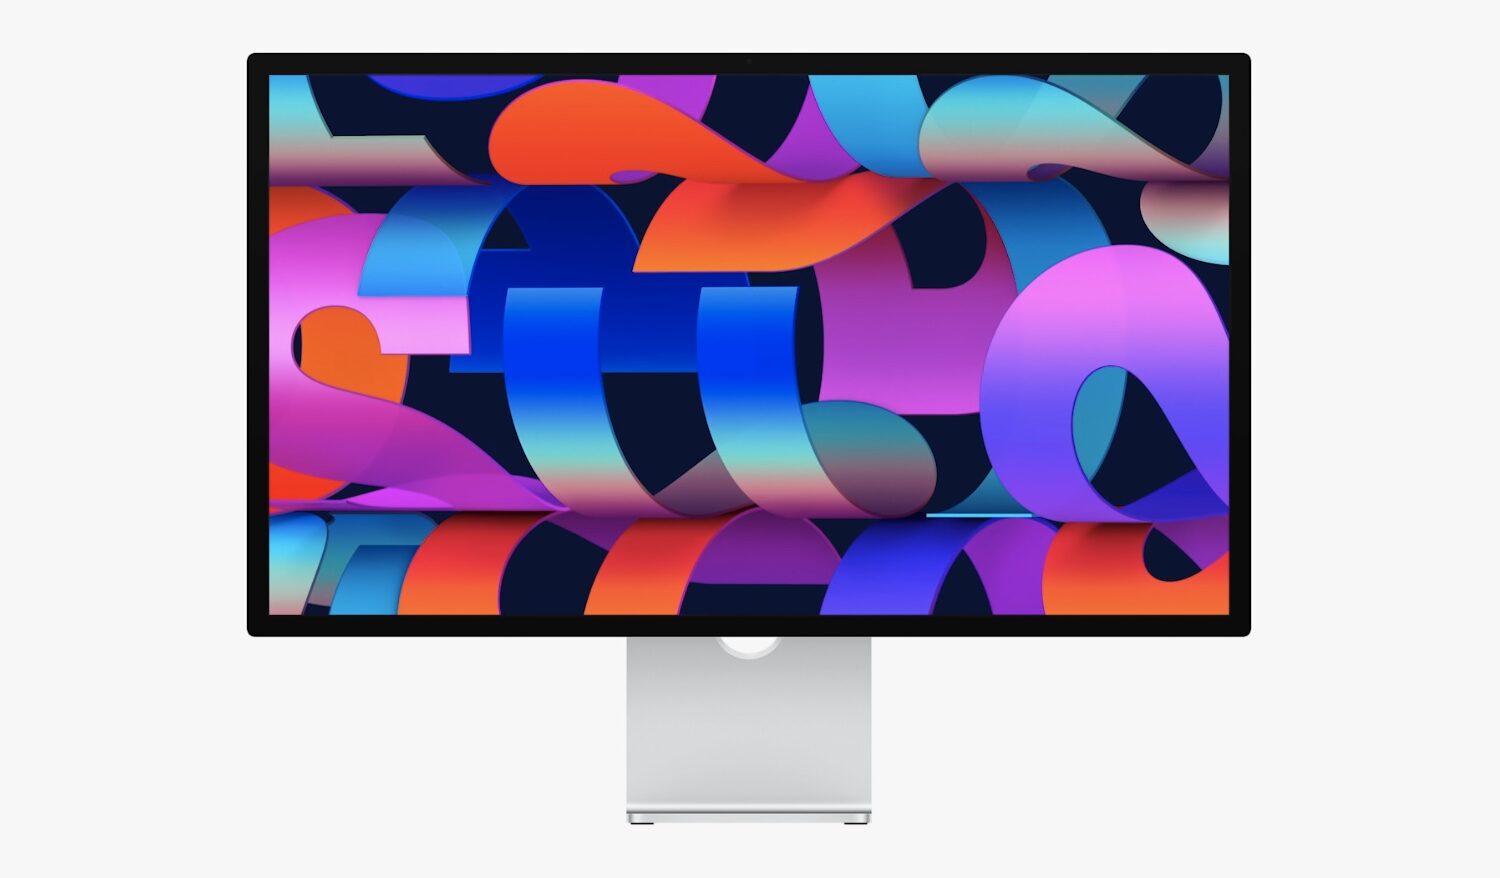 Marketing image showcasing the front of Apple's Studio Display external monitor